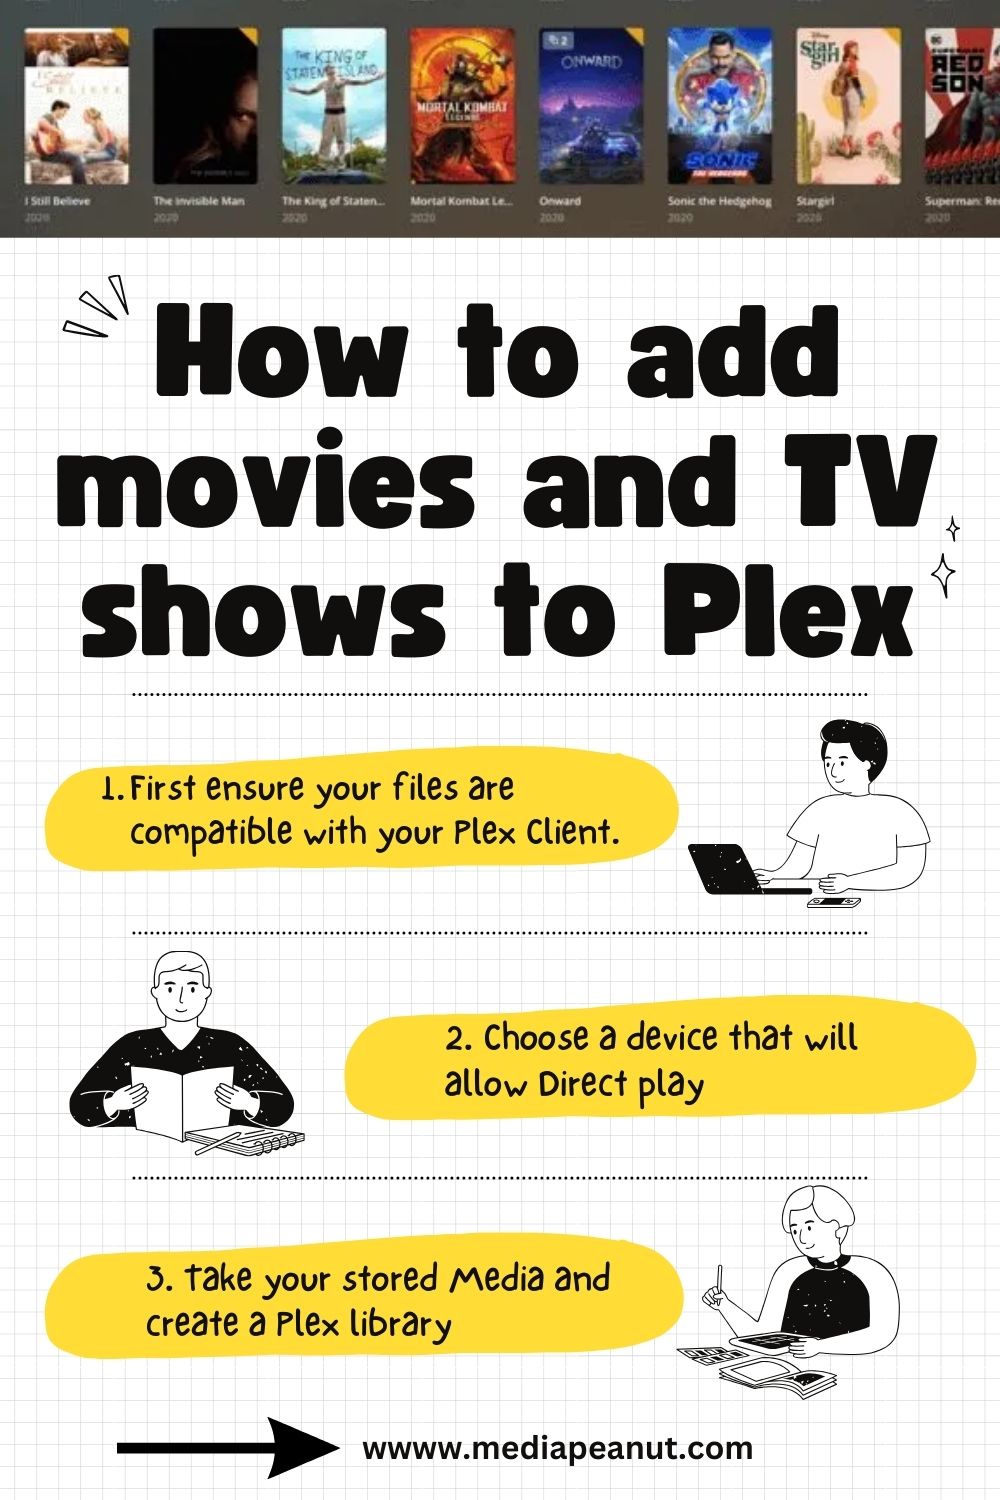 How to add movies and TV shows to